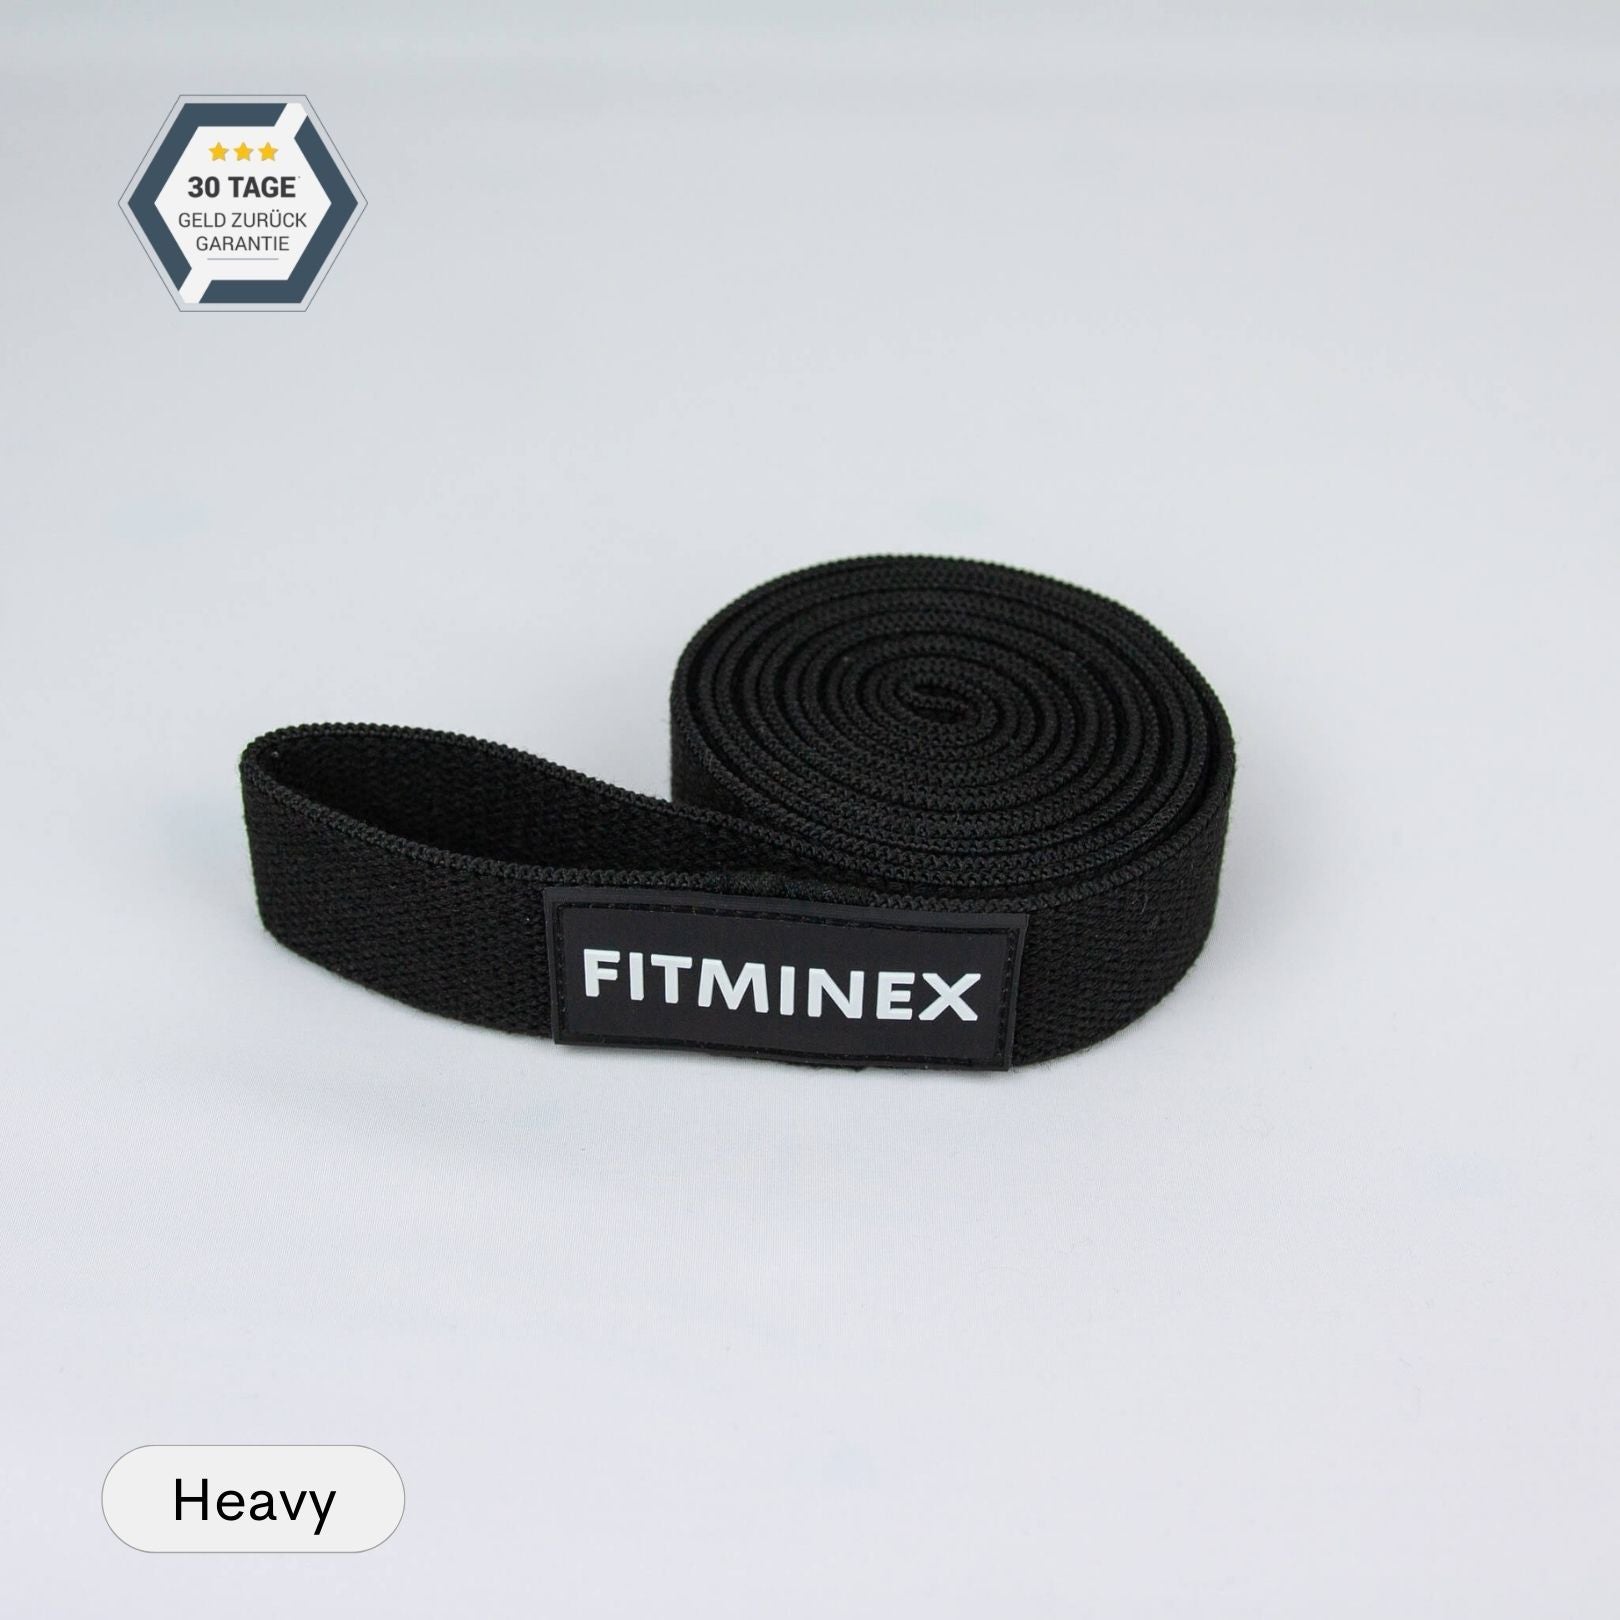 FITMINEX Fitnessband Resistance Band